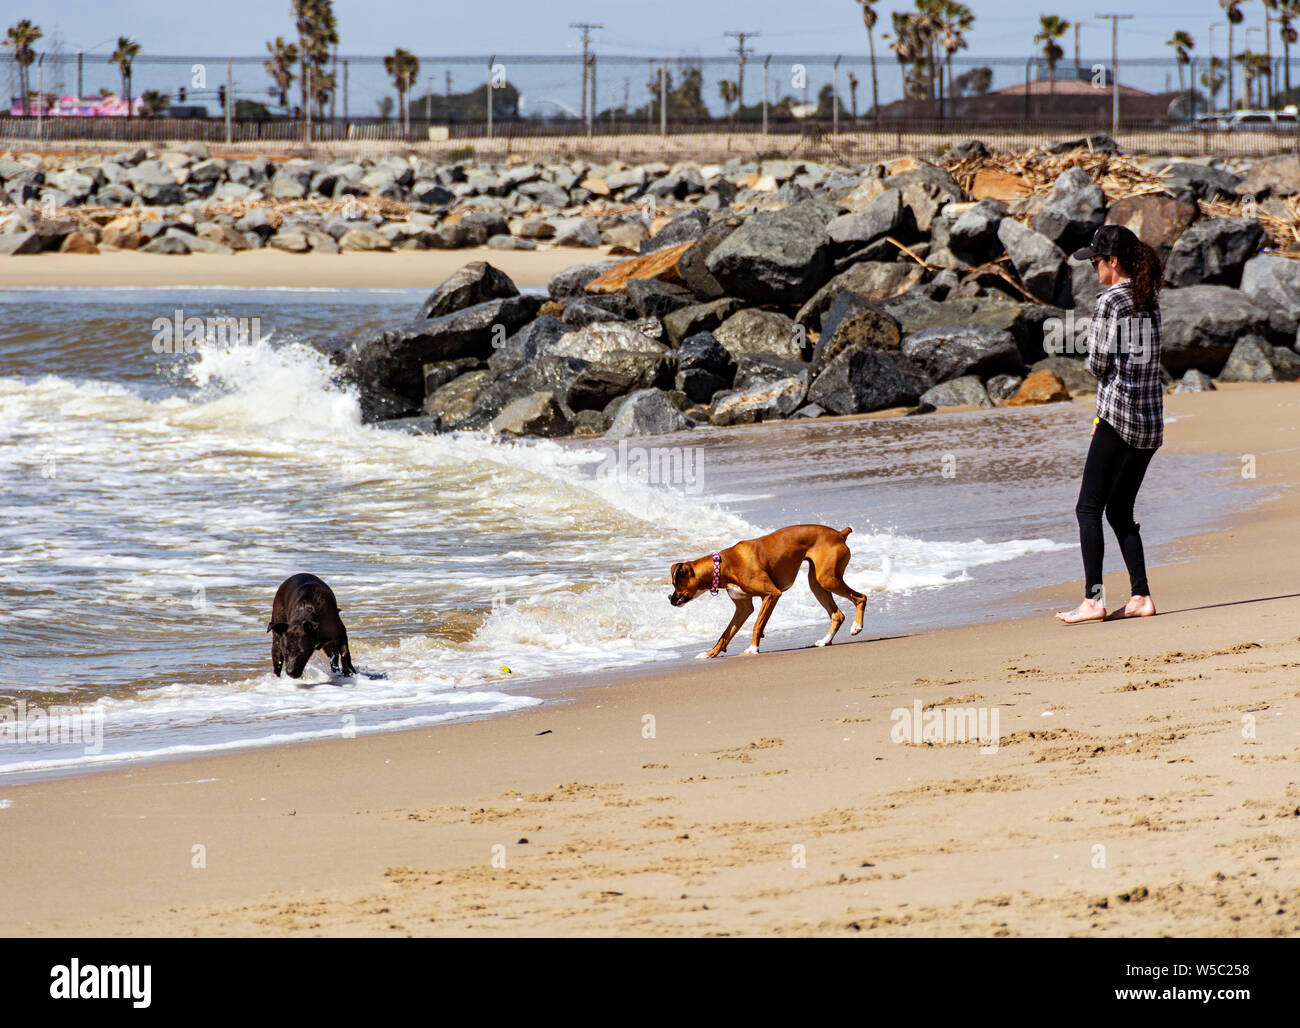 Newport Beach, CA / USA - March 9, 2019: Dogs play off-leash on the Santa Ana River County Beach after rainstorms swept trash onto the beach. Stock Photo